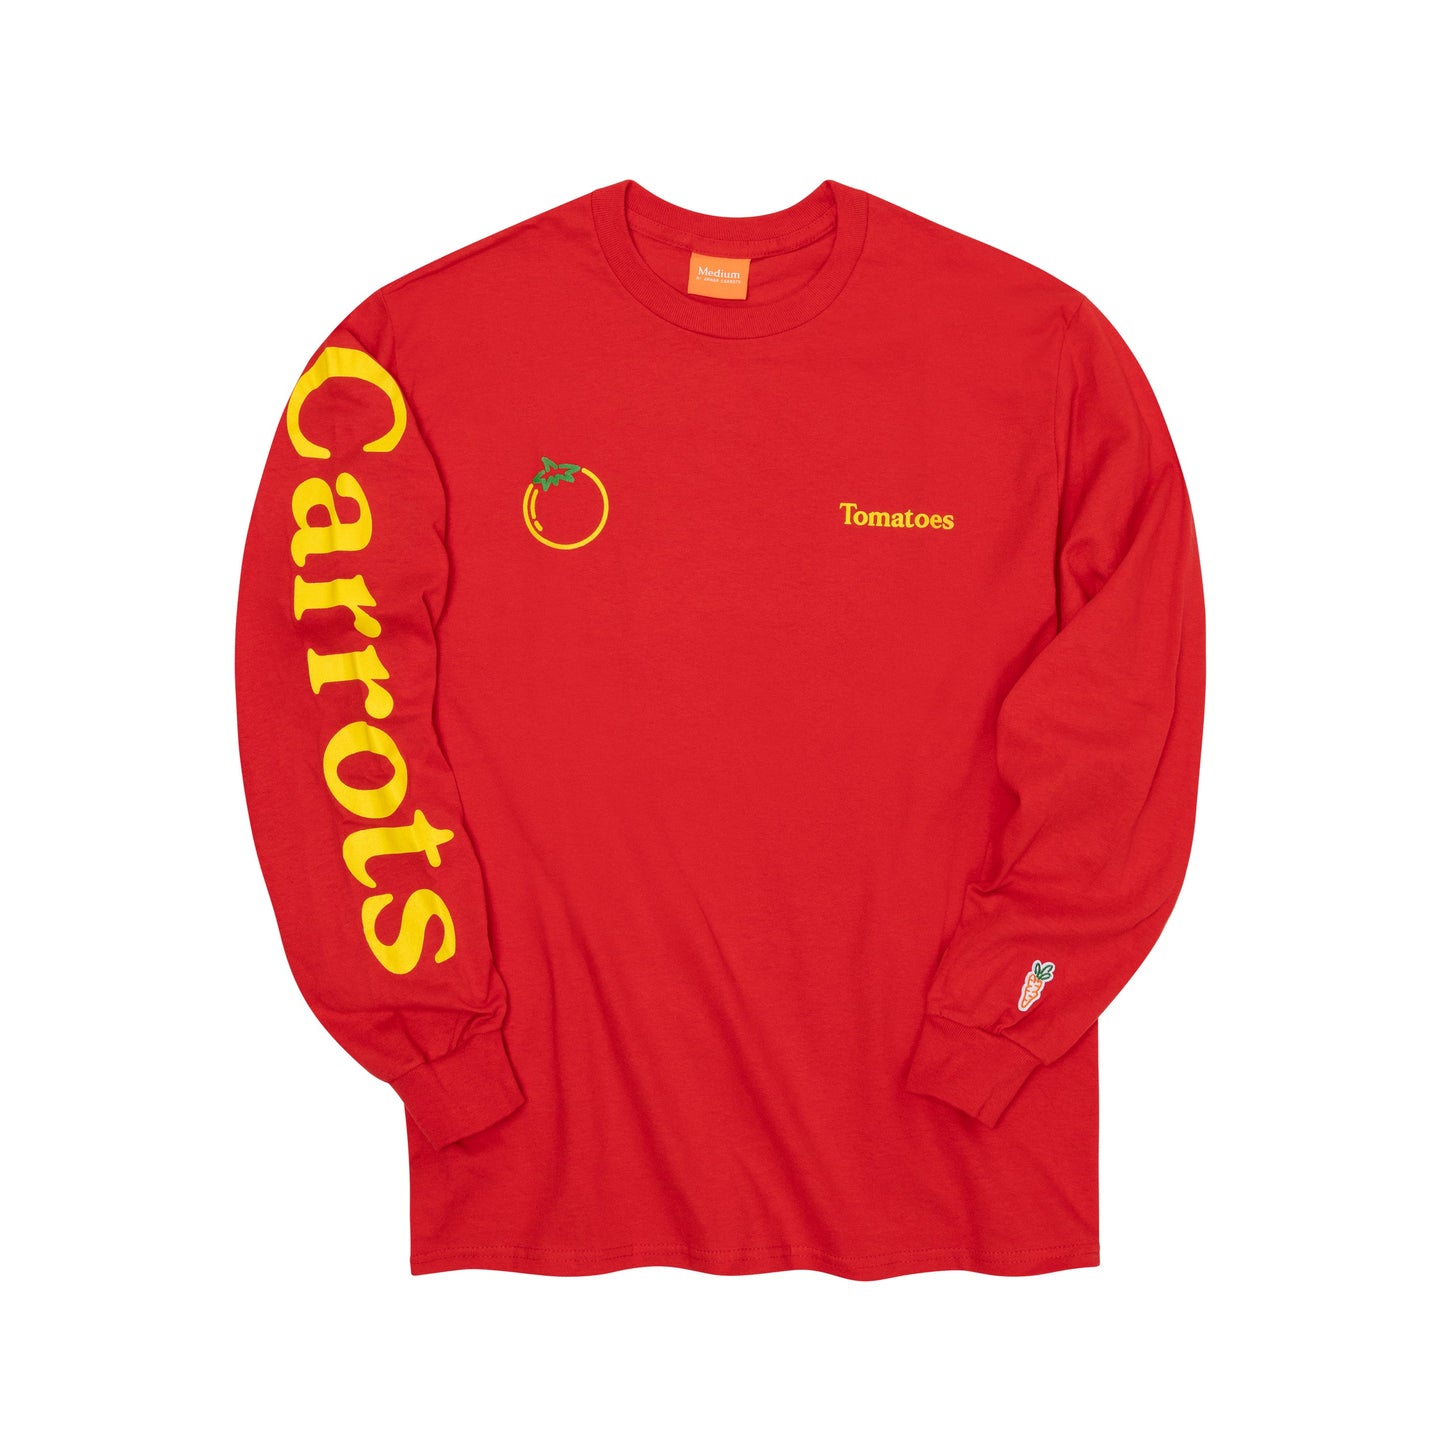 Carrots tomatoes long sleeve tee red